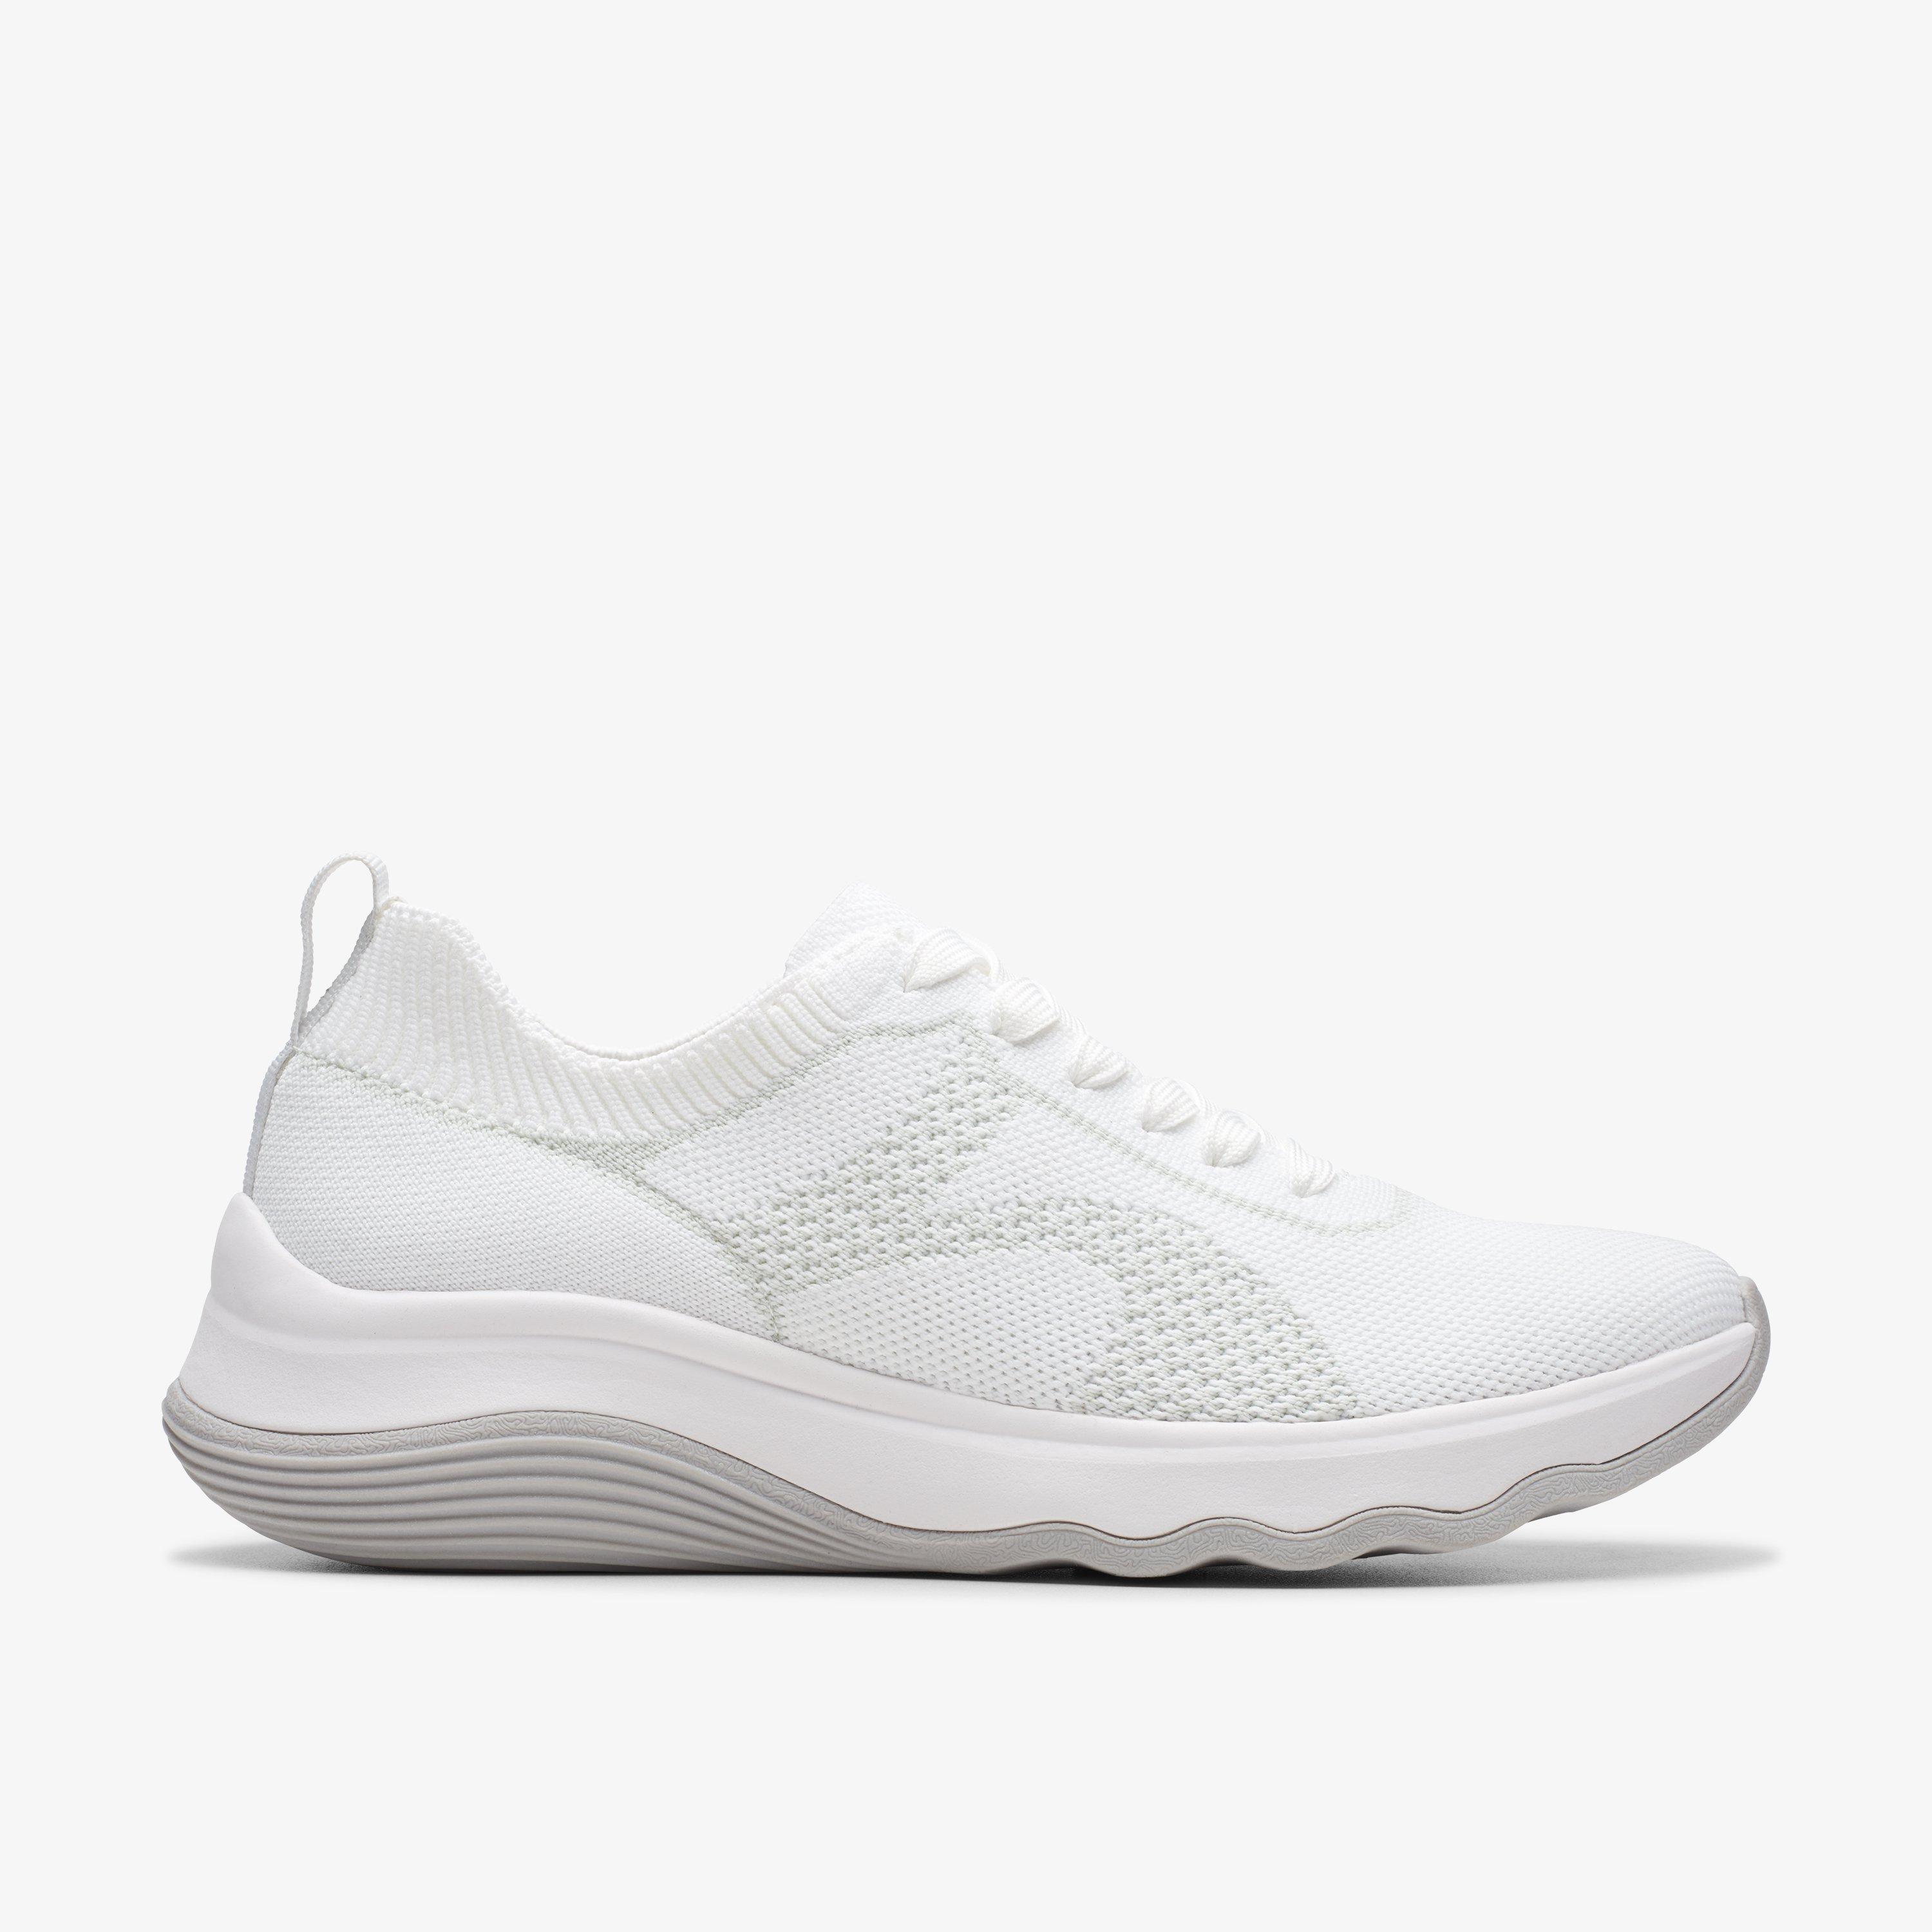 WOMENS Circuit Tie White Knit Sneakers | Clarks US